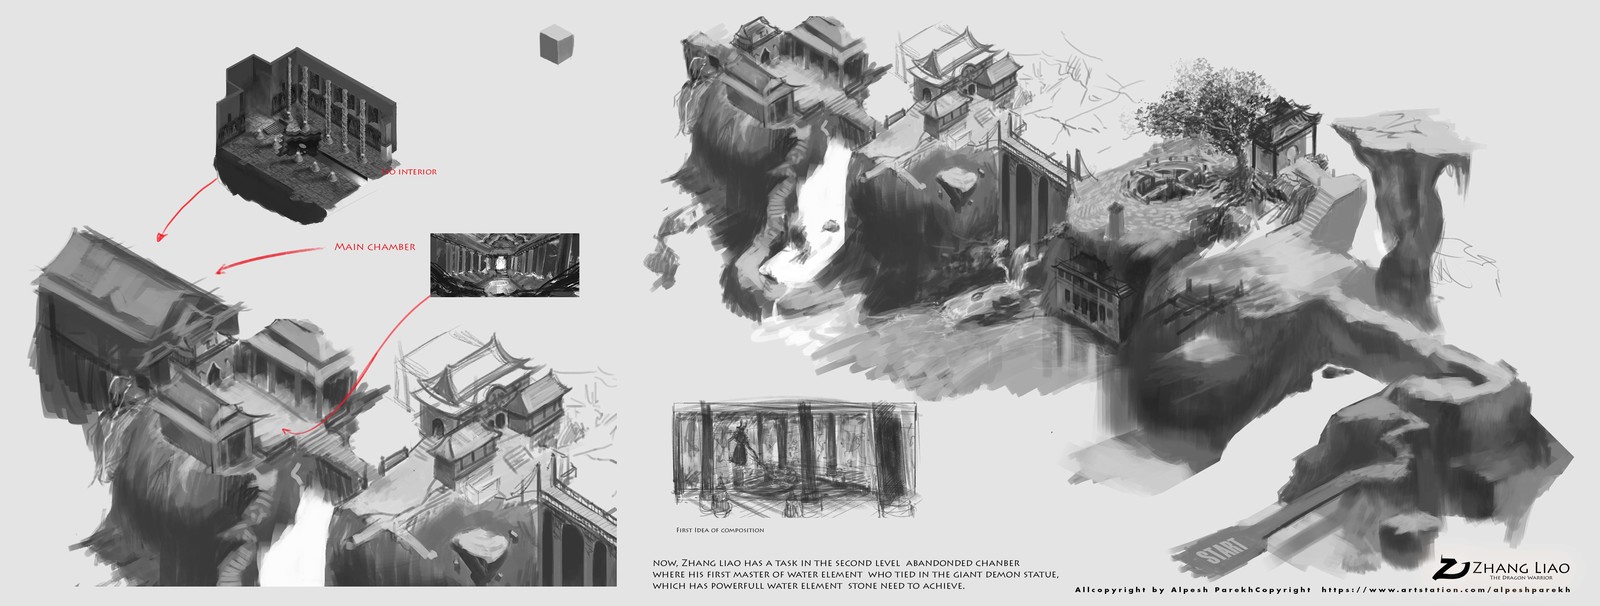 Zhang Liao- Level 2 abandoned chamber Iso layout of game play map and development 